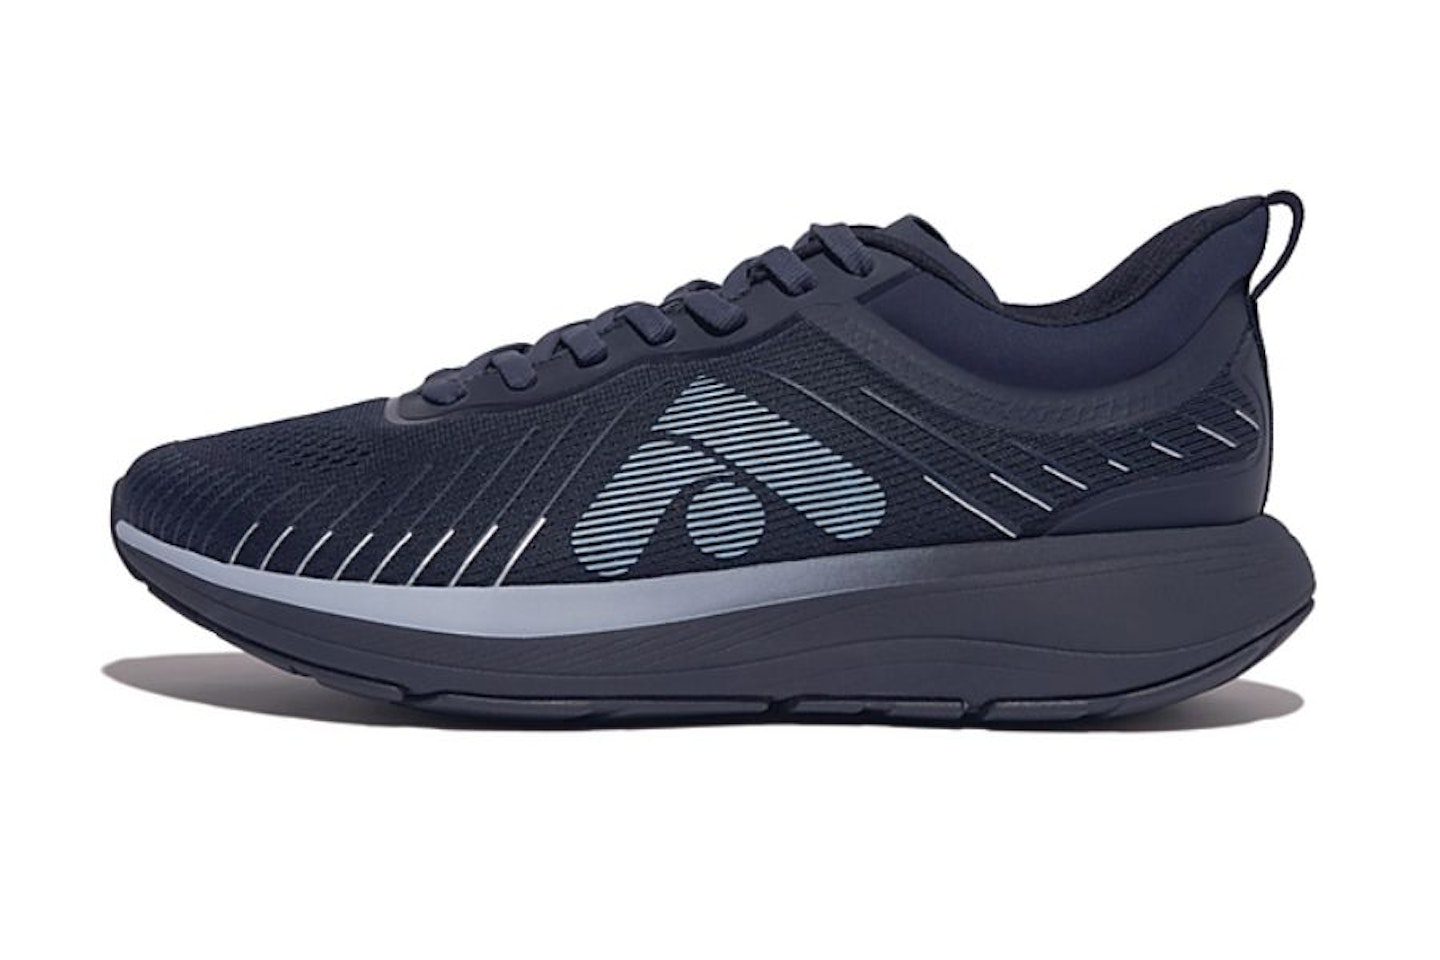 FitFlop FFRUNNER Mesh Running/Sports Trainers